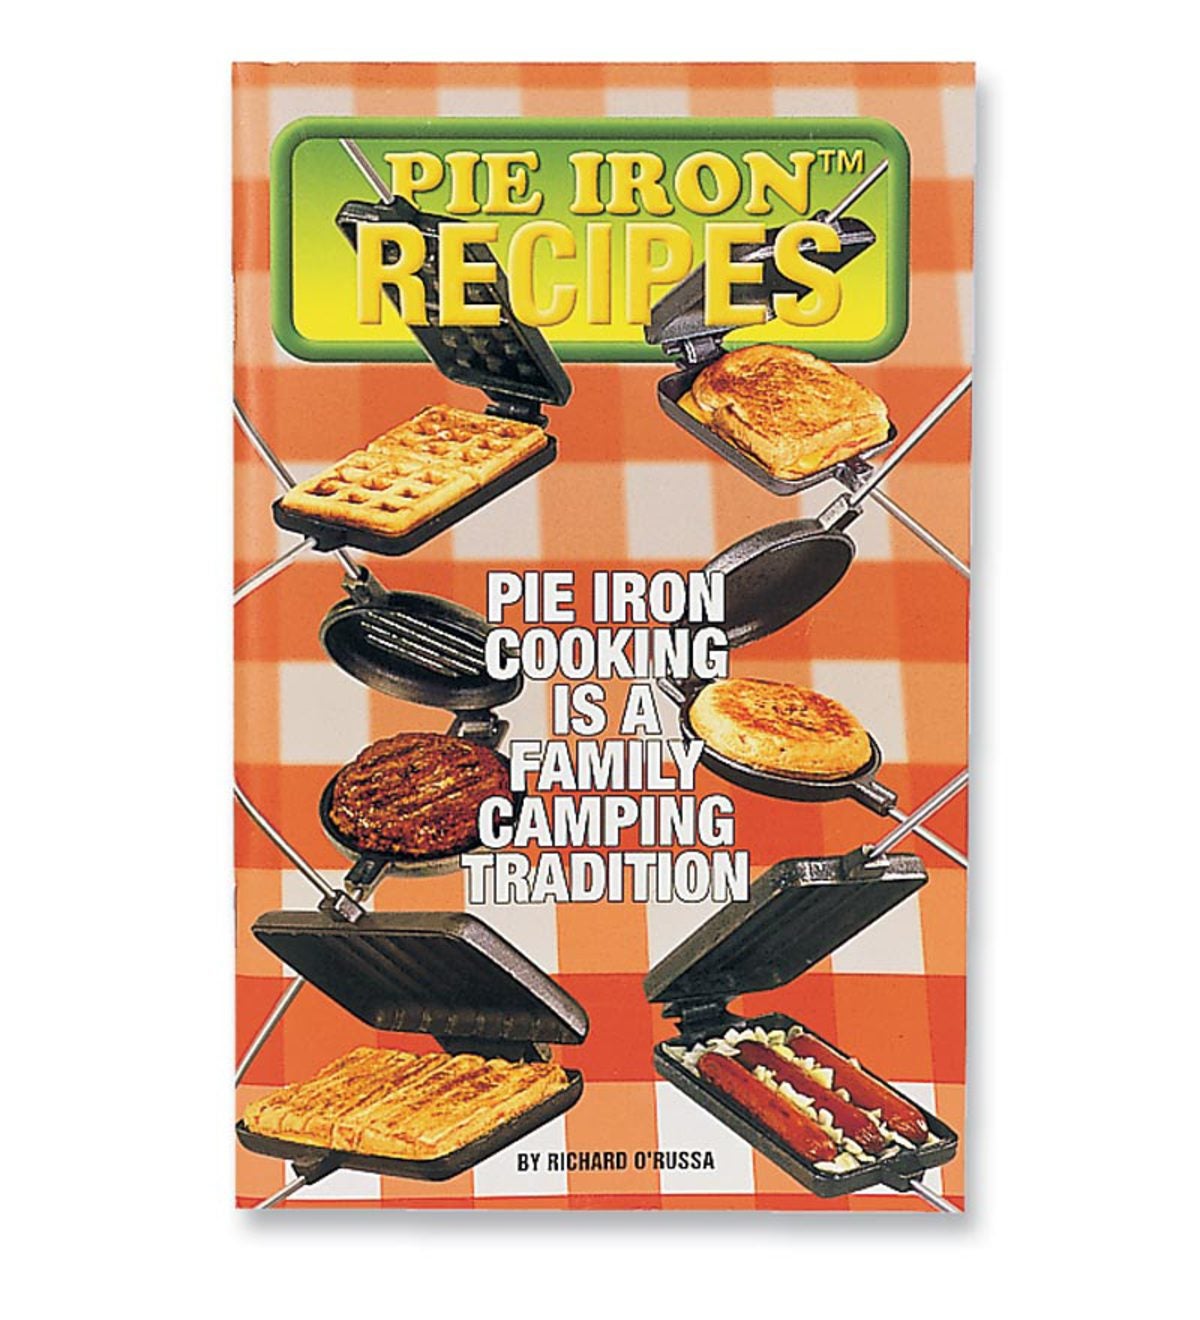 64-Page Fireside Pie Iron Cooking Recipes Book by Richard O'Russa